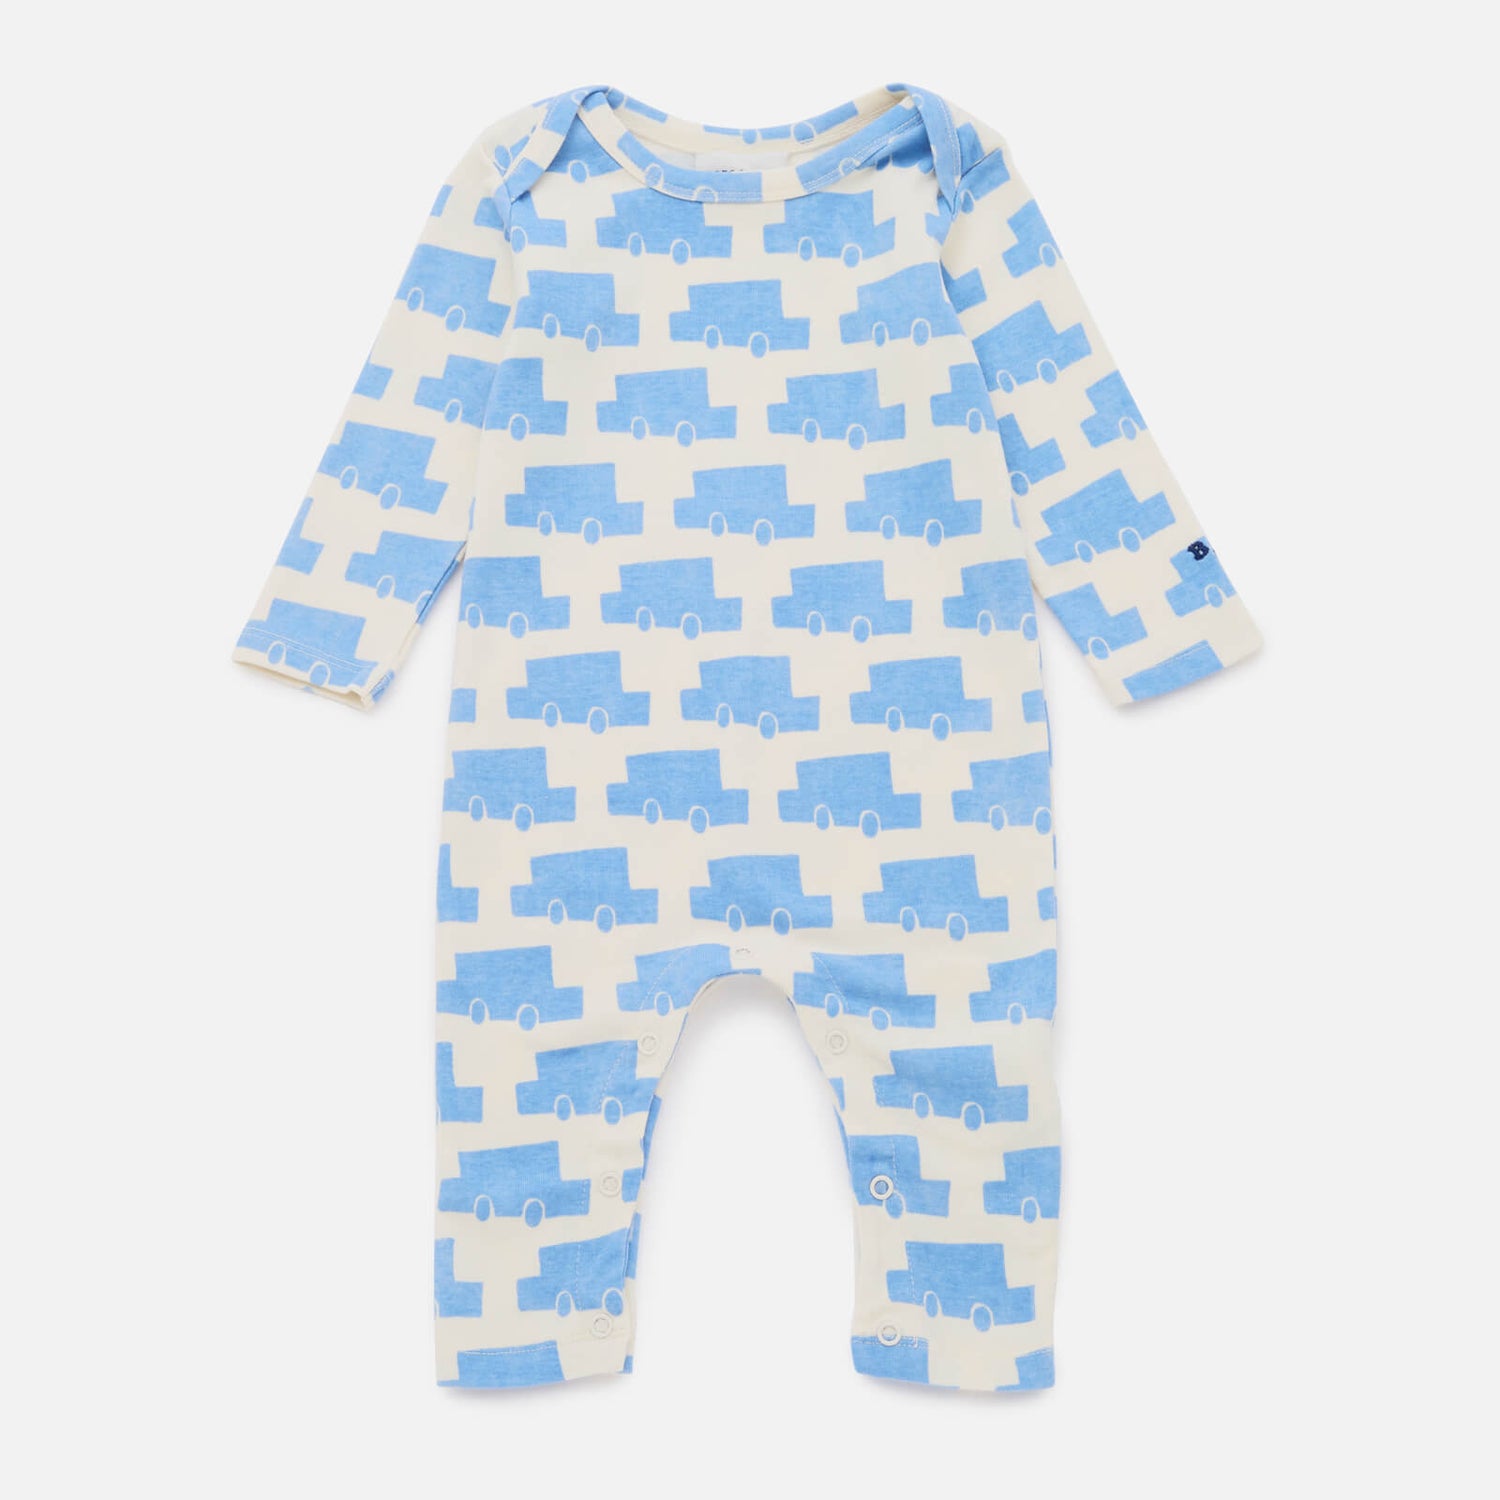 BoBo Choses Baby's Printed Cotton-Blend Jersey Babygrow - 3-6 months